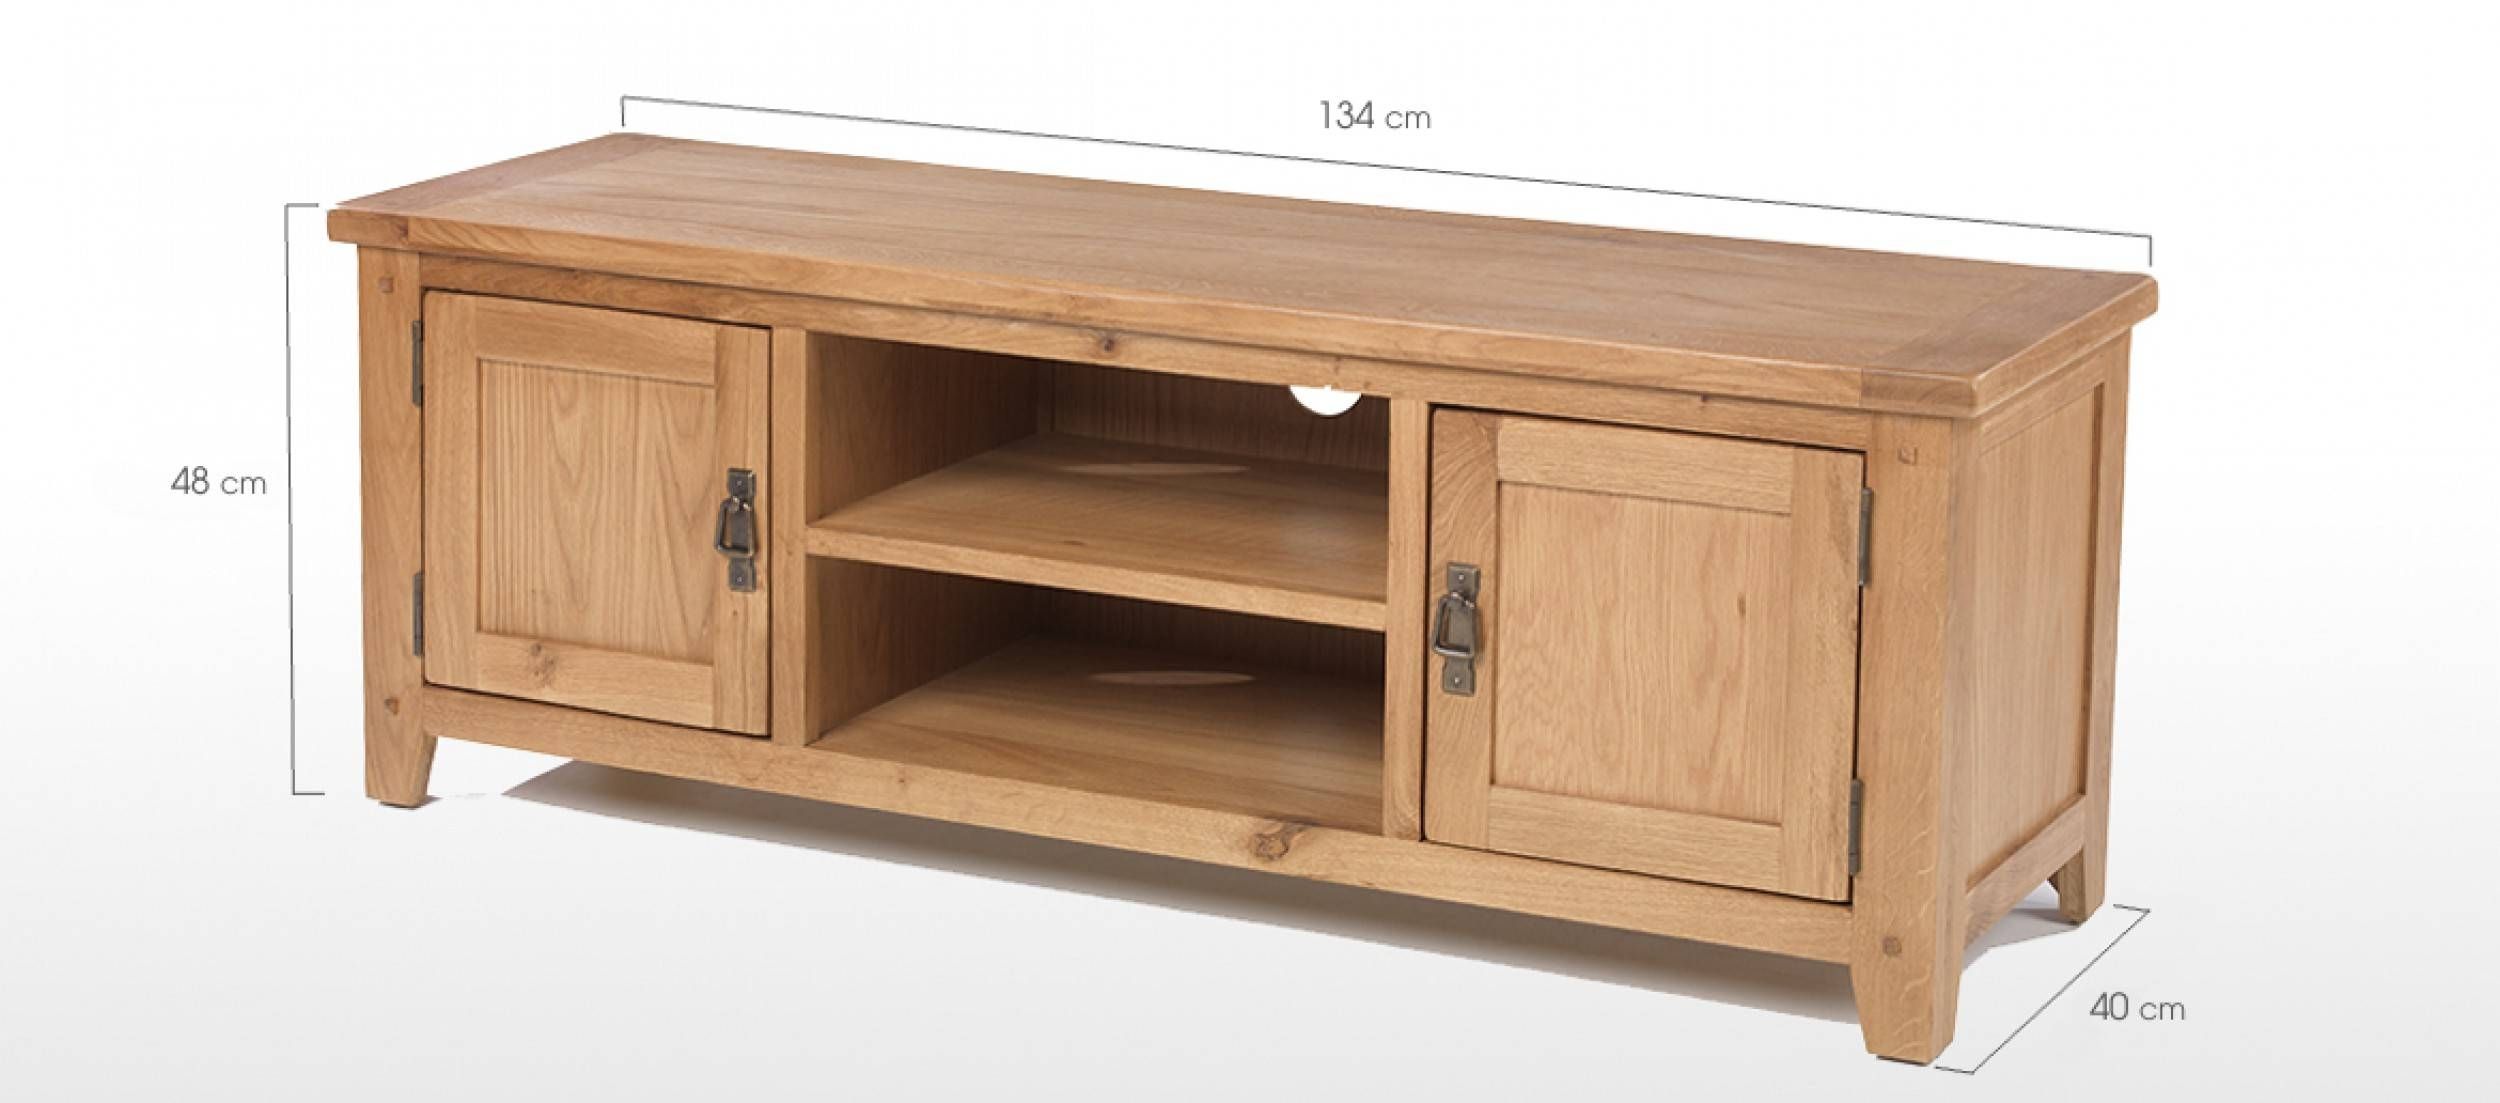 Rustic Oak Plasma Tv Stand | Quercus Living Pertaining To Rustic Oak Tv Stands (View 3 of 15)